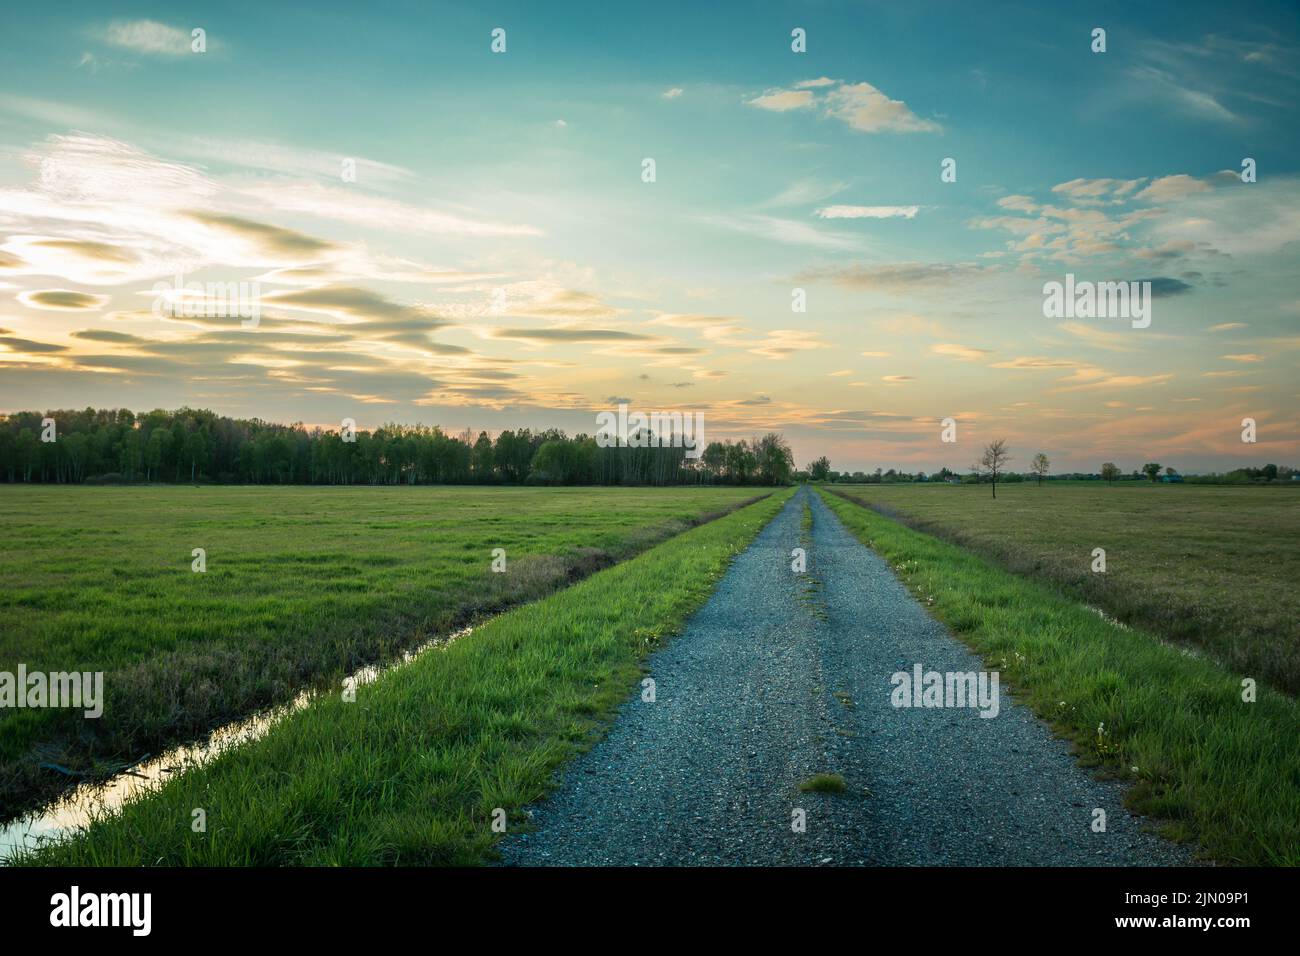 A gravel road through green meadows and a forest on the horizon Stock Photo